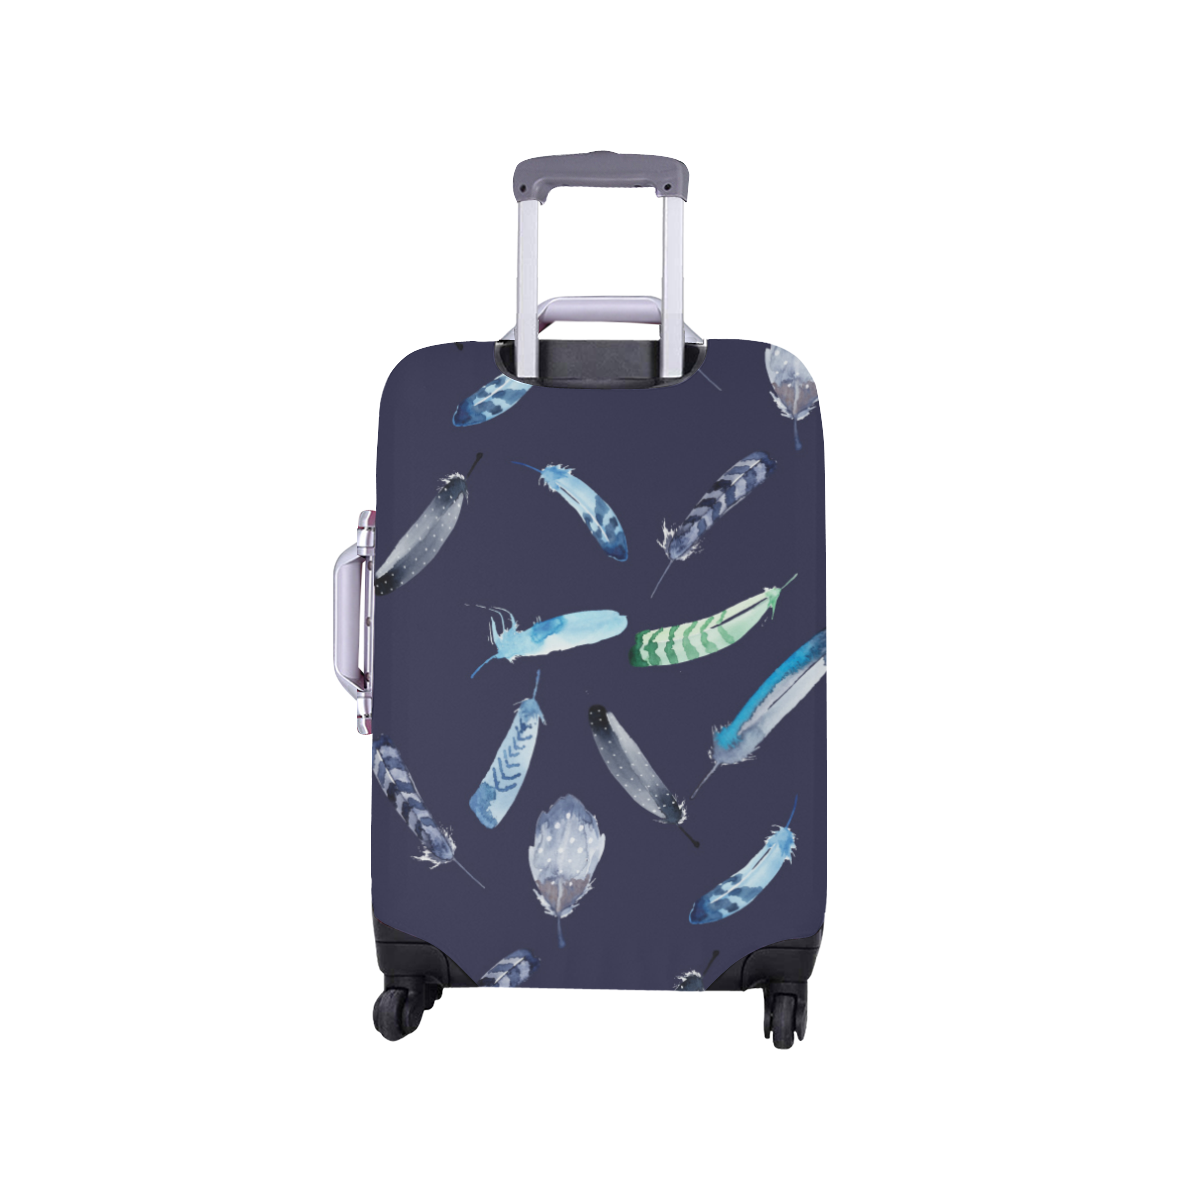 Feather dark blue Luggage Cover/Small 18"-21"